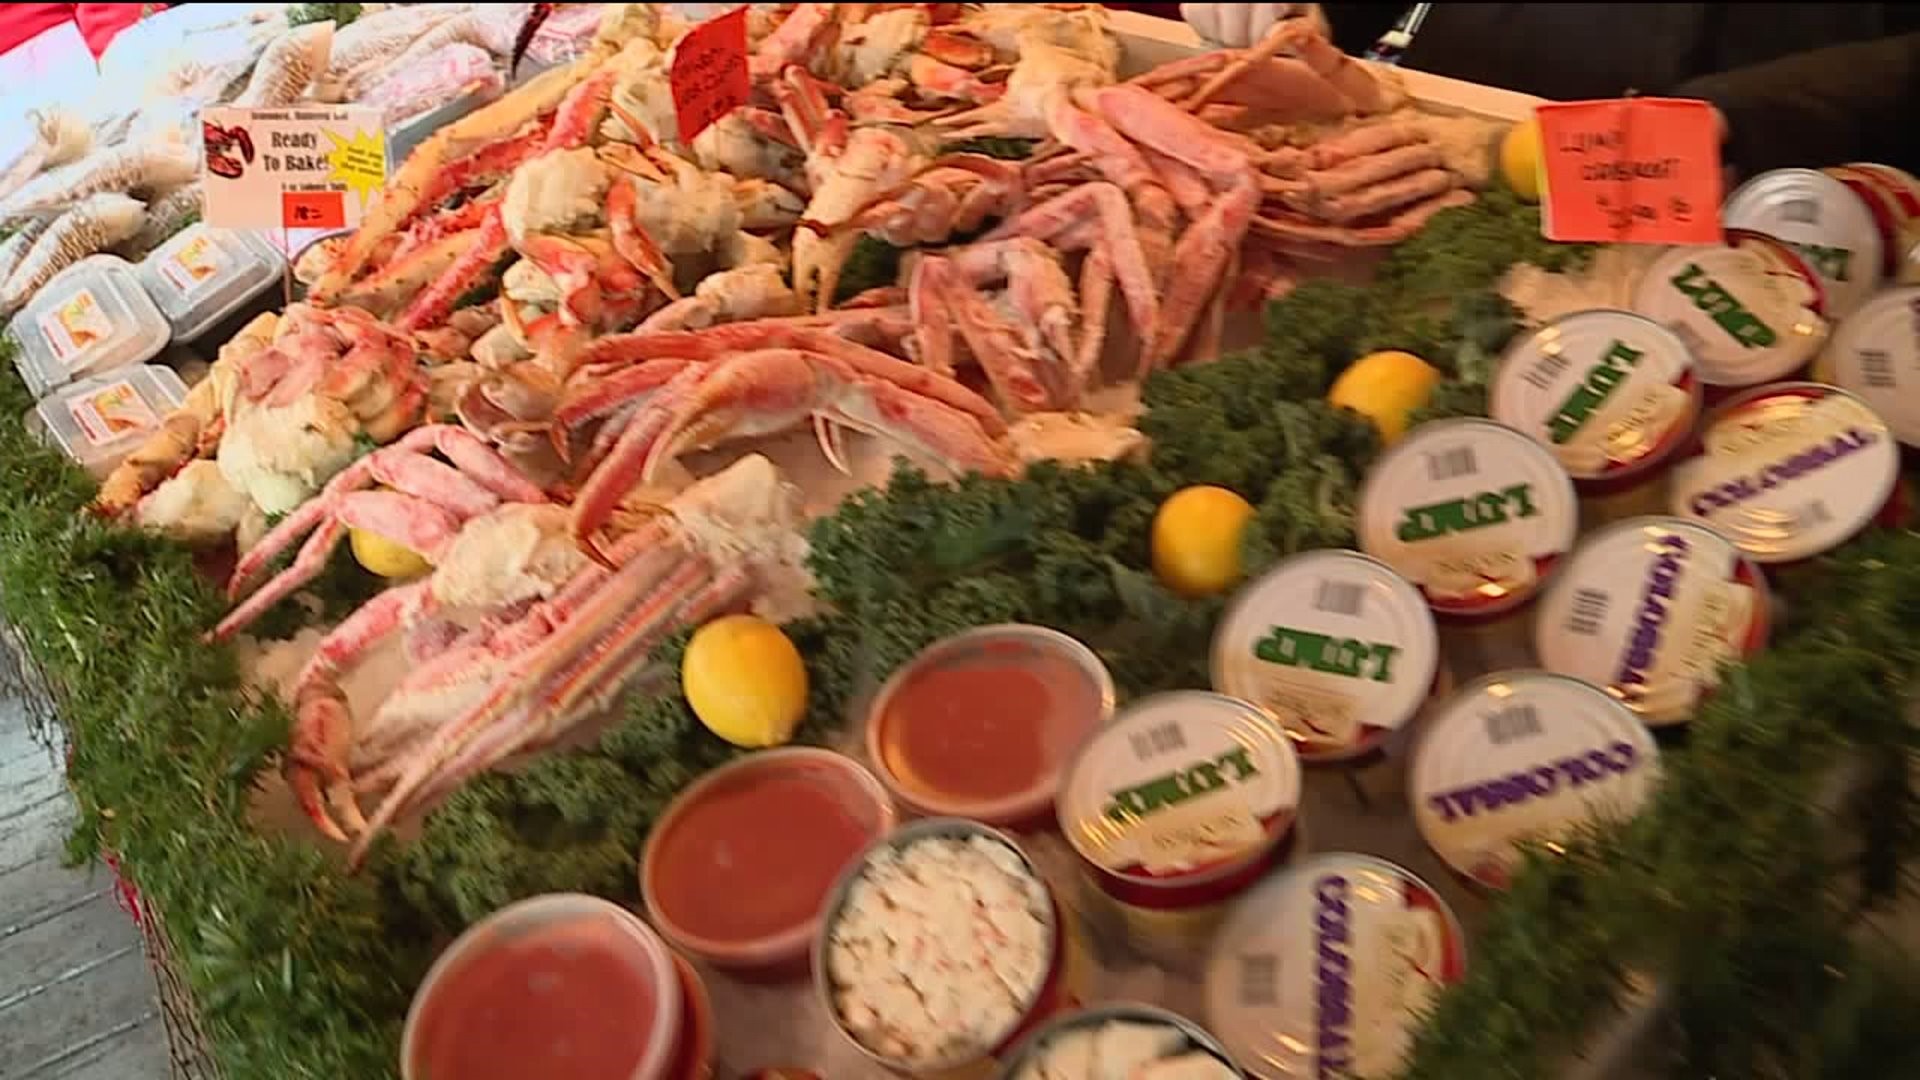 Shoppers Stop At Seafood Market Ahead Of Christmas Eve Dinner Wnep Com